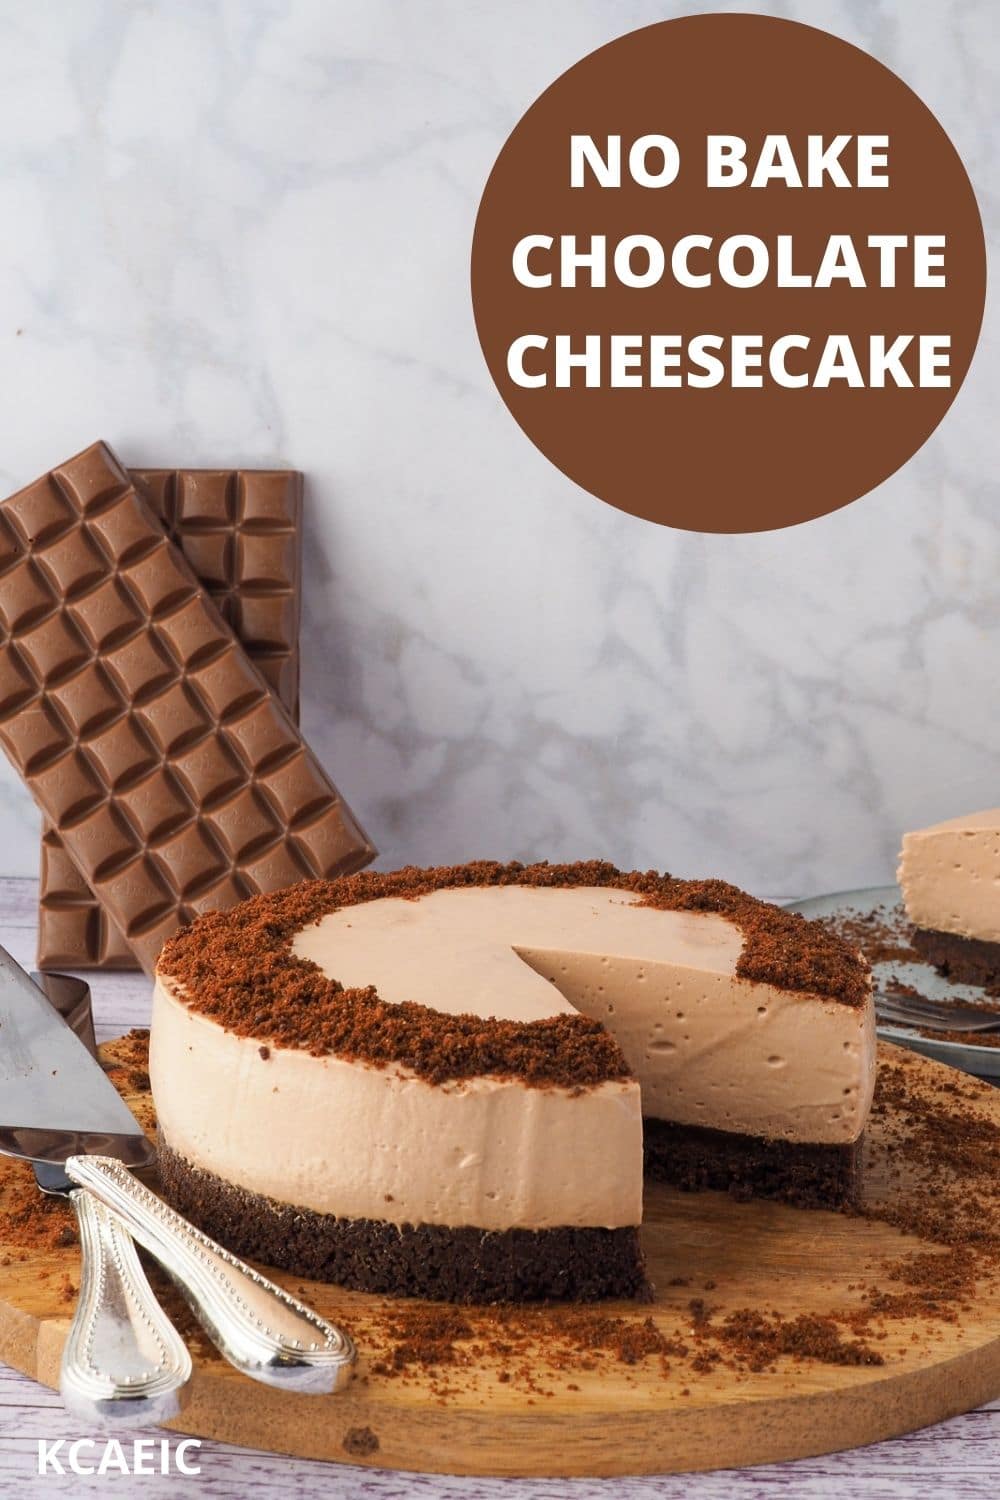 Cheesecake on a serving board with serving wear and slice of cheesecake and block of chocolate in the background, with text overlay, no cake chocolate cheesecake and KCAEIC.